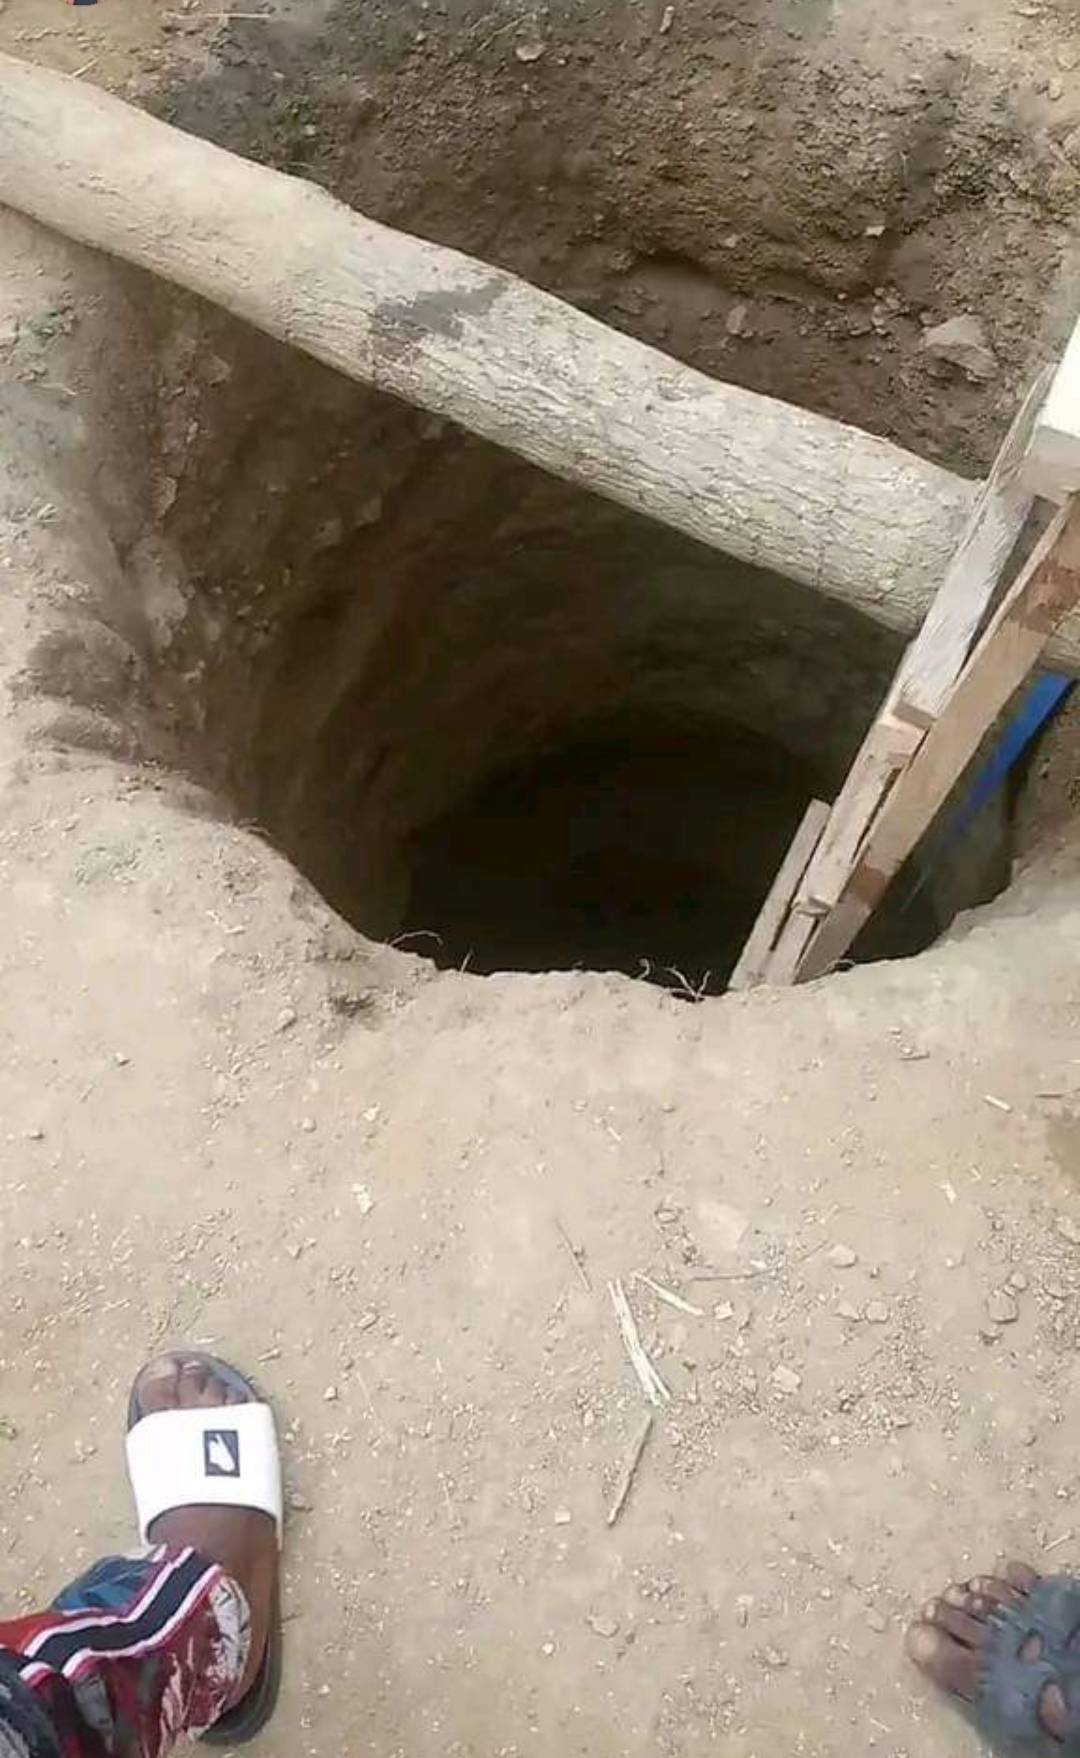 Two youths die in Cross River mining site